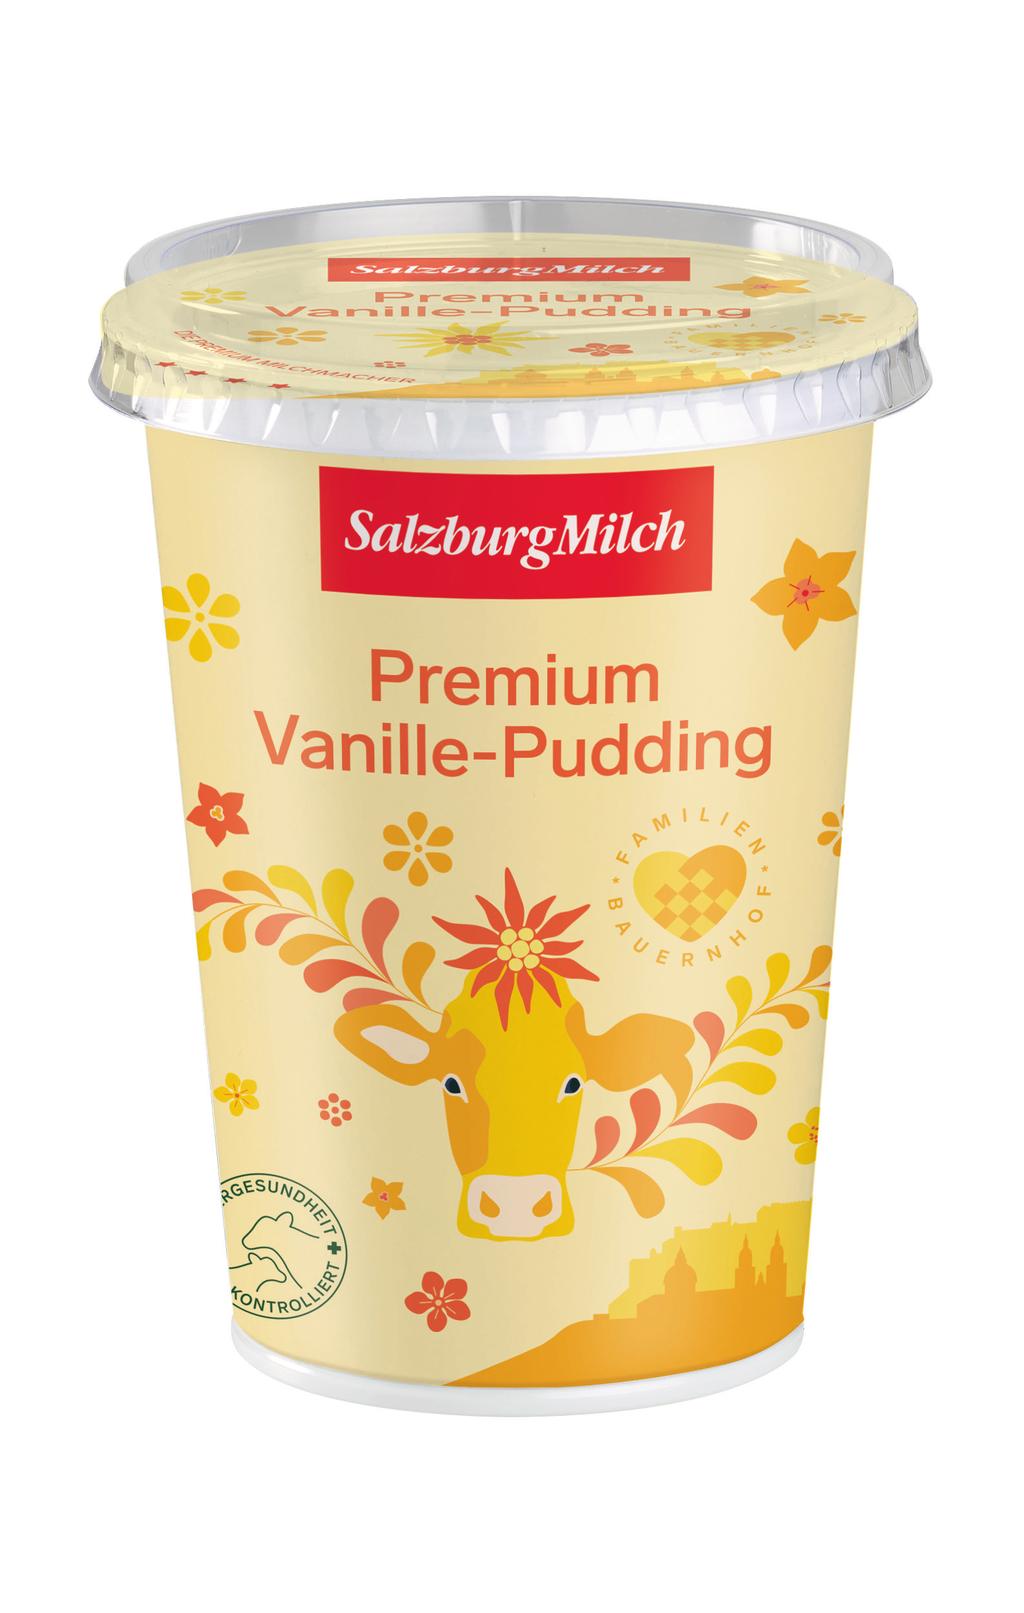 Pudding The SalzburgMilch puddings in the practical 1 kg buckets are available in the popular types chocolate and vanilla.